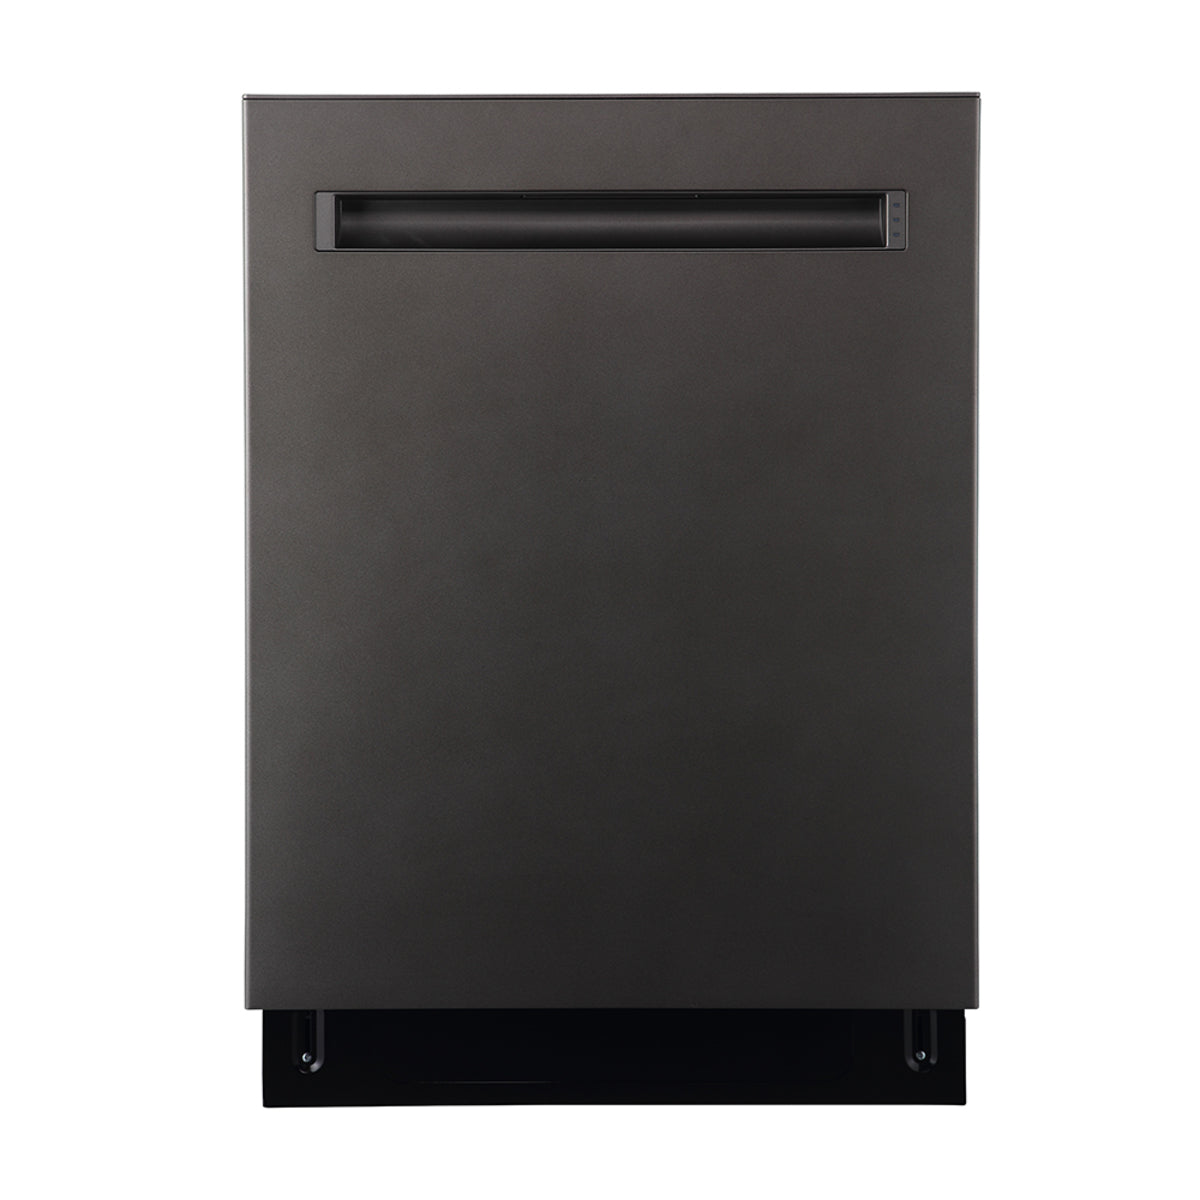 GE - 48 dBA Built In Dishwasher in Grey - GBP655SMPES